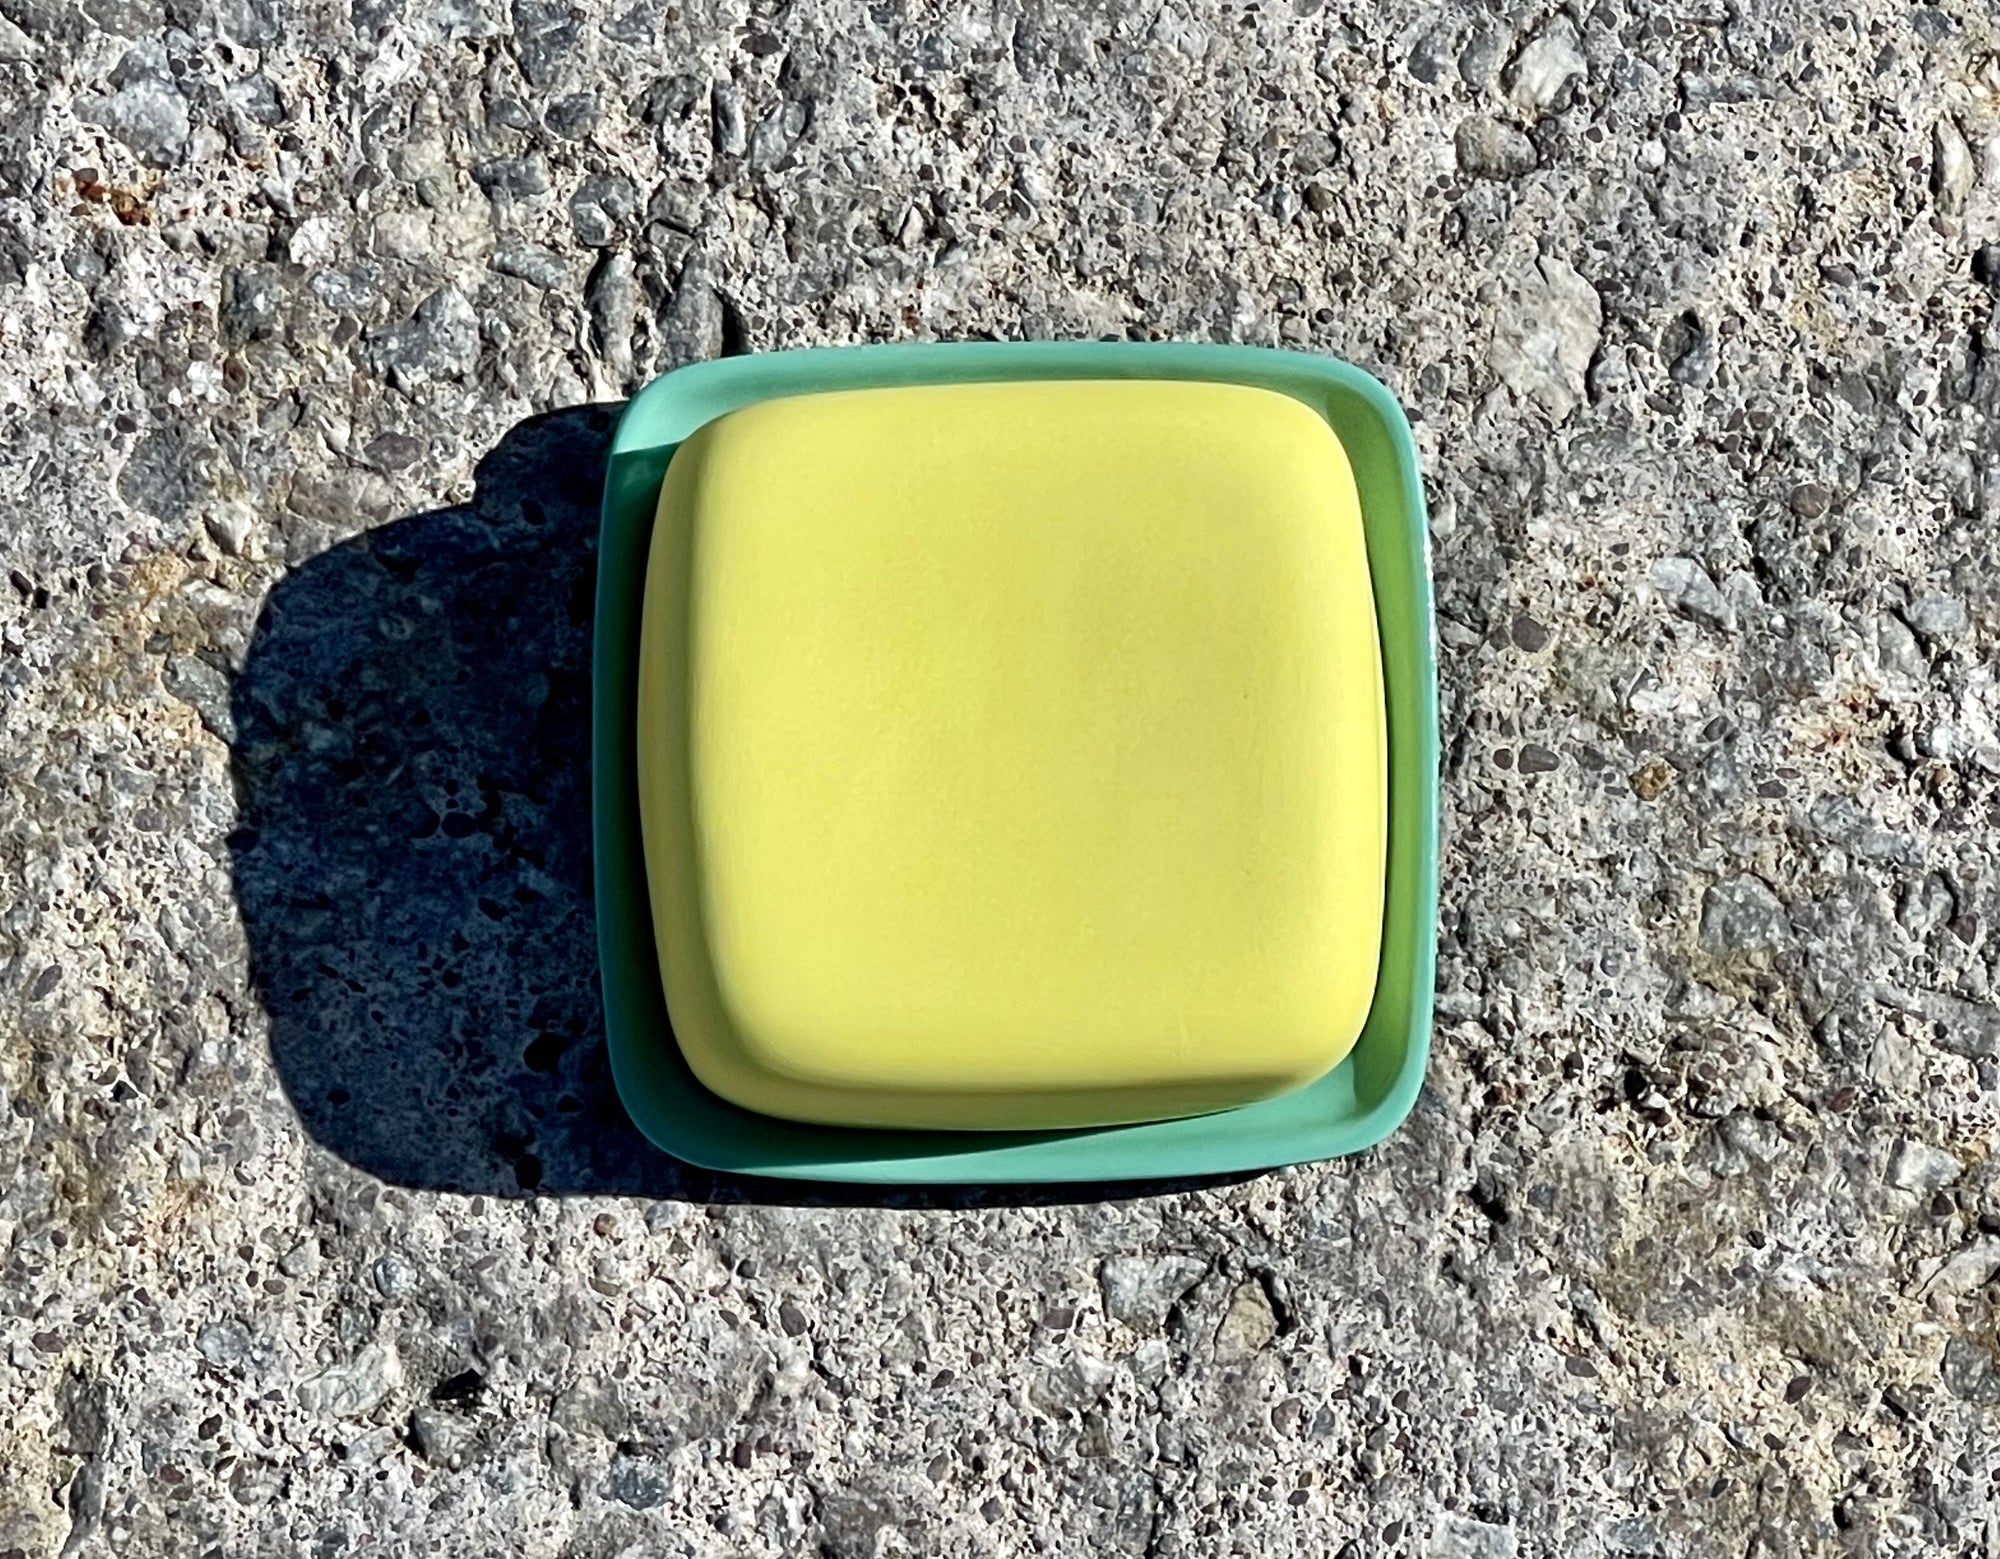 Butter Dish, Yellow and Green, Adele Stanley